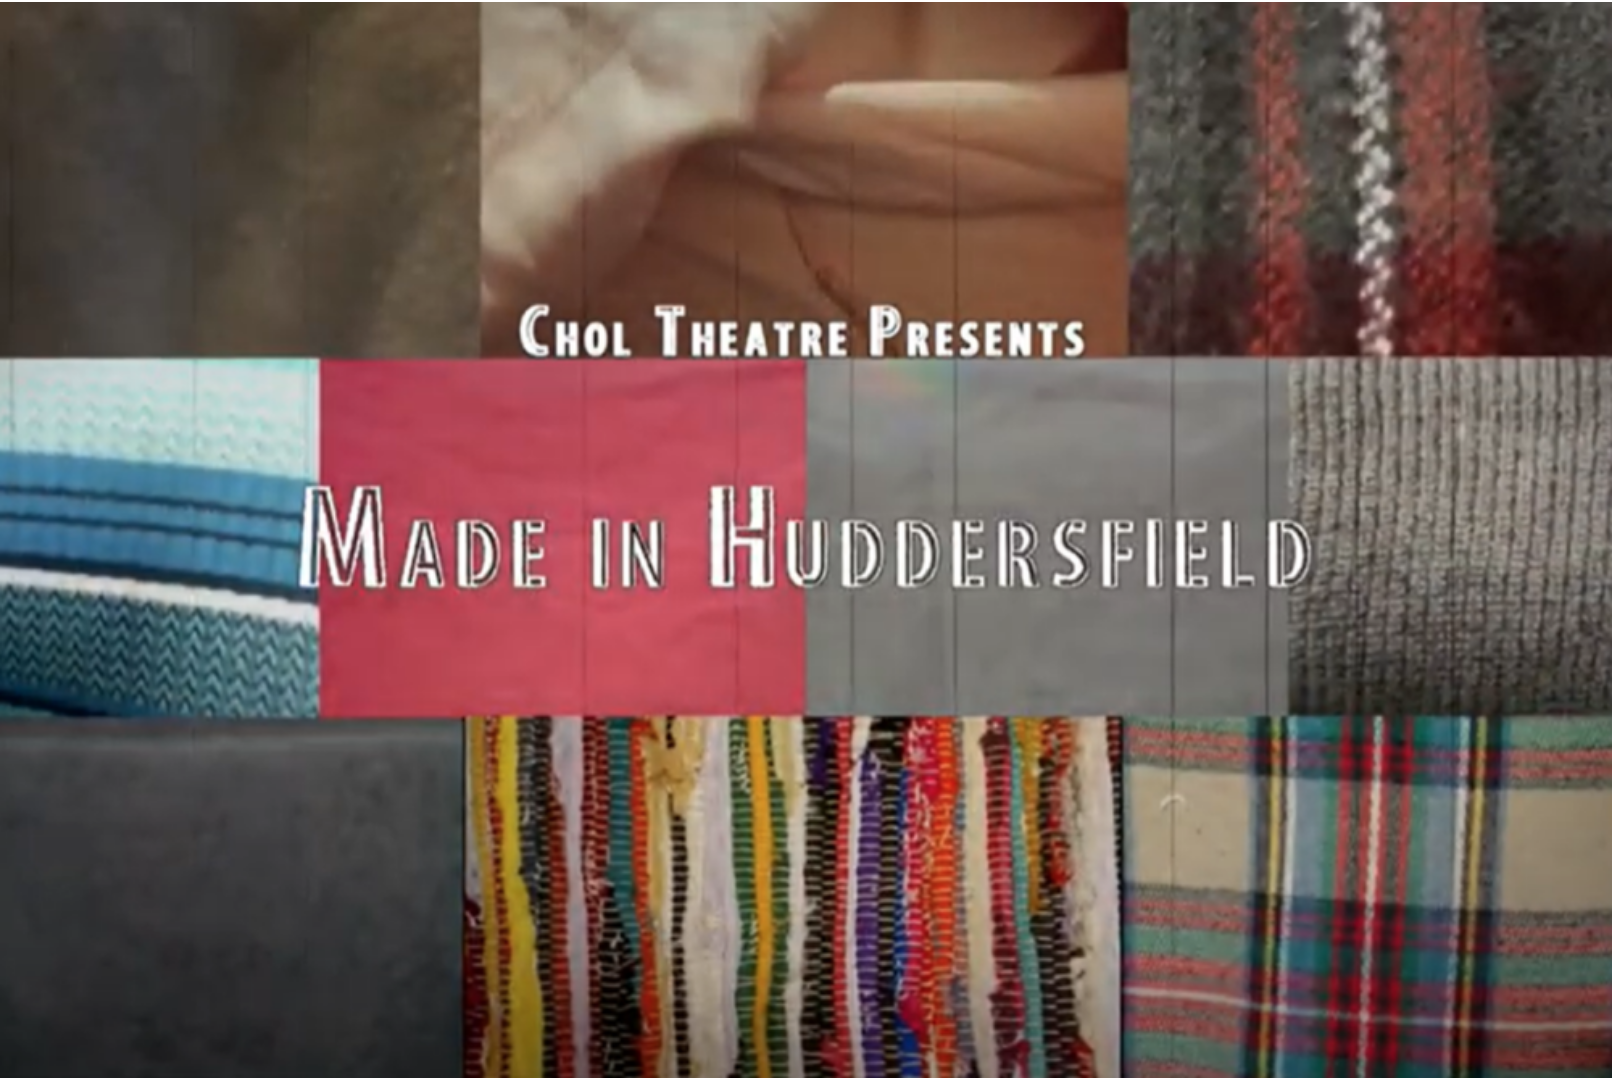 Screen shot from a YouTube film showing different fabric designs in a composite image, with Chol Theatre Presents, and Made in Huddersfield written across the top